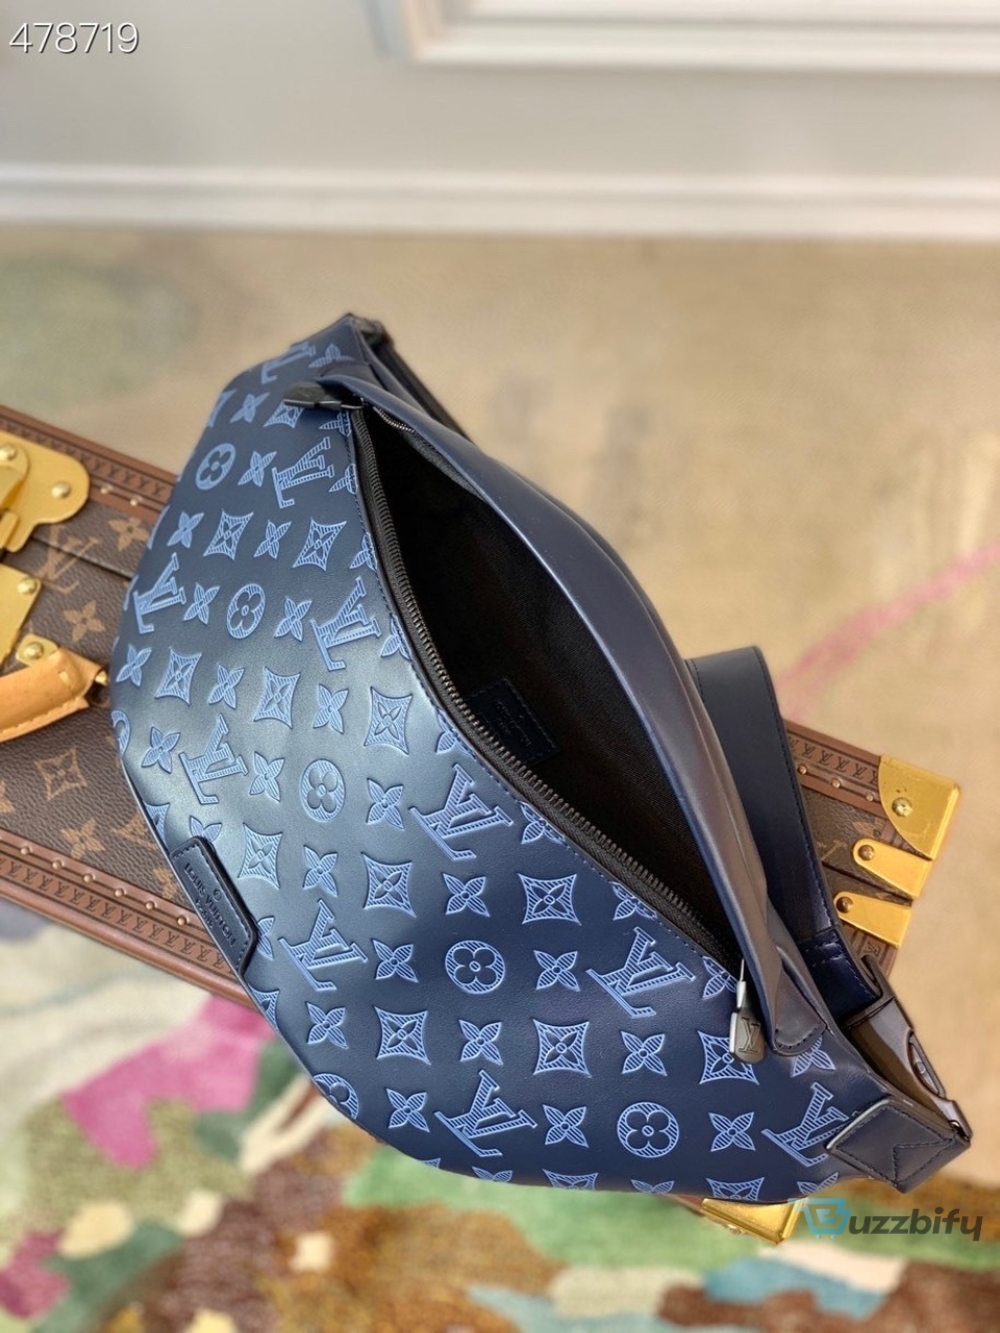 louis vuitton discovery bumbag pm monogram shadow navy blue for men mens belt bags 173in44cm lv m45729 2799 buzzbify 1 16